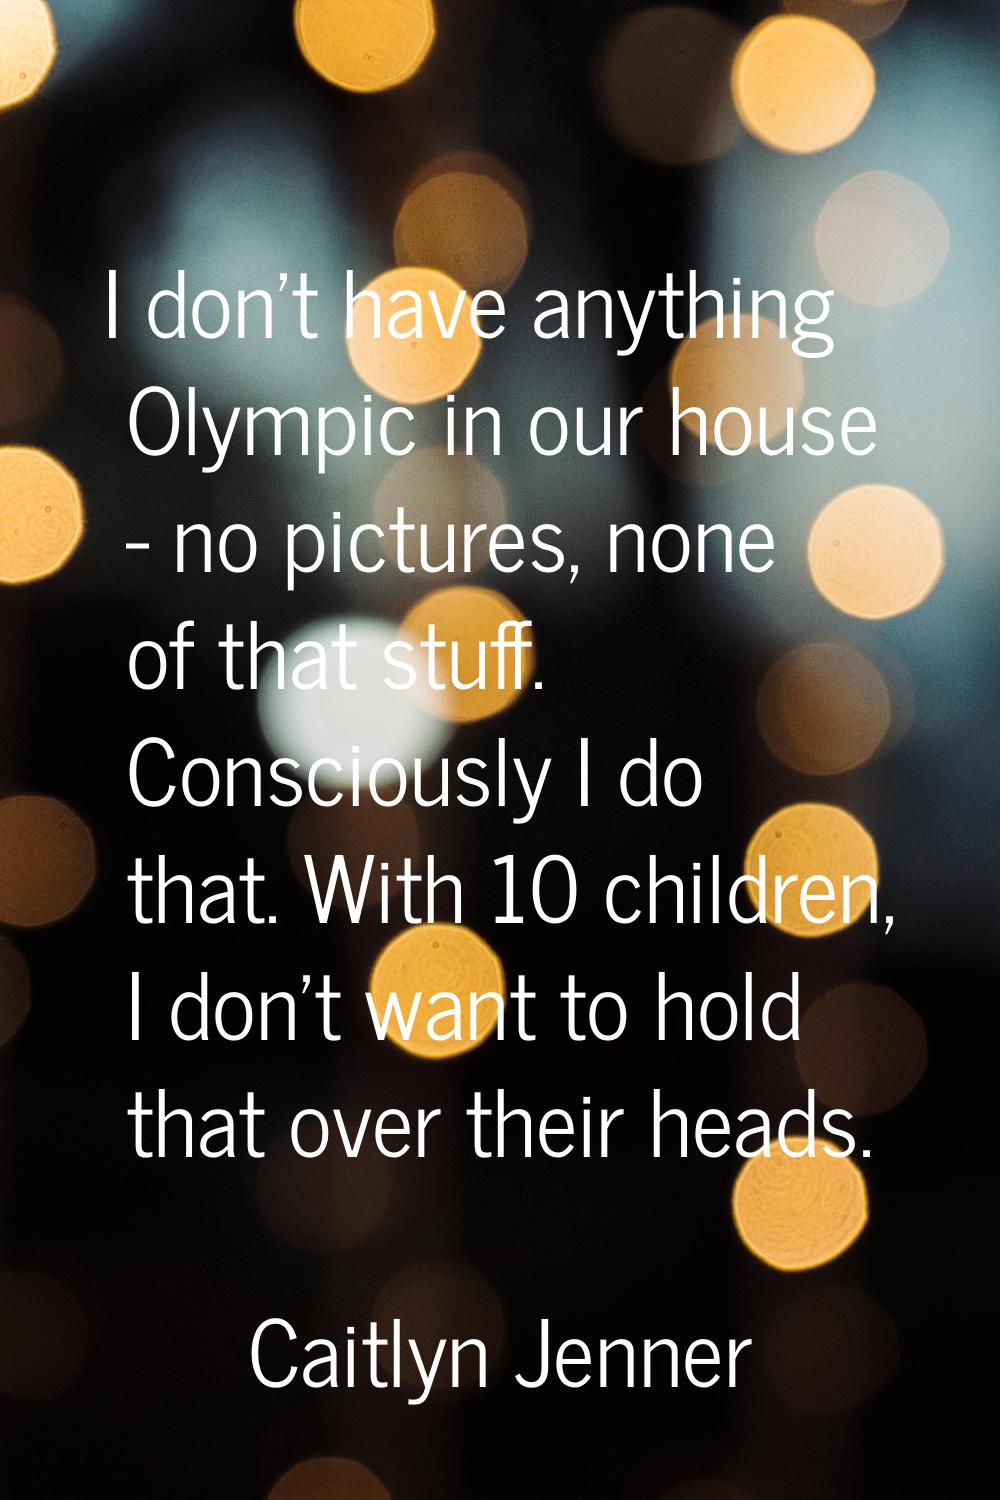 I don't have anything Olympic in our house - no pictures, none of that stuff. Consciously I do that